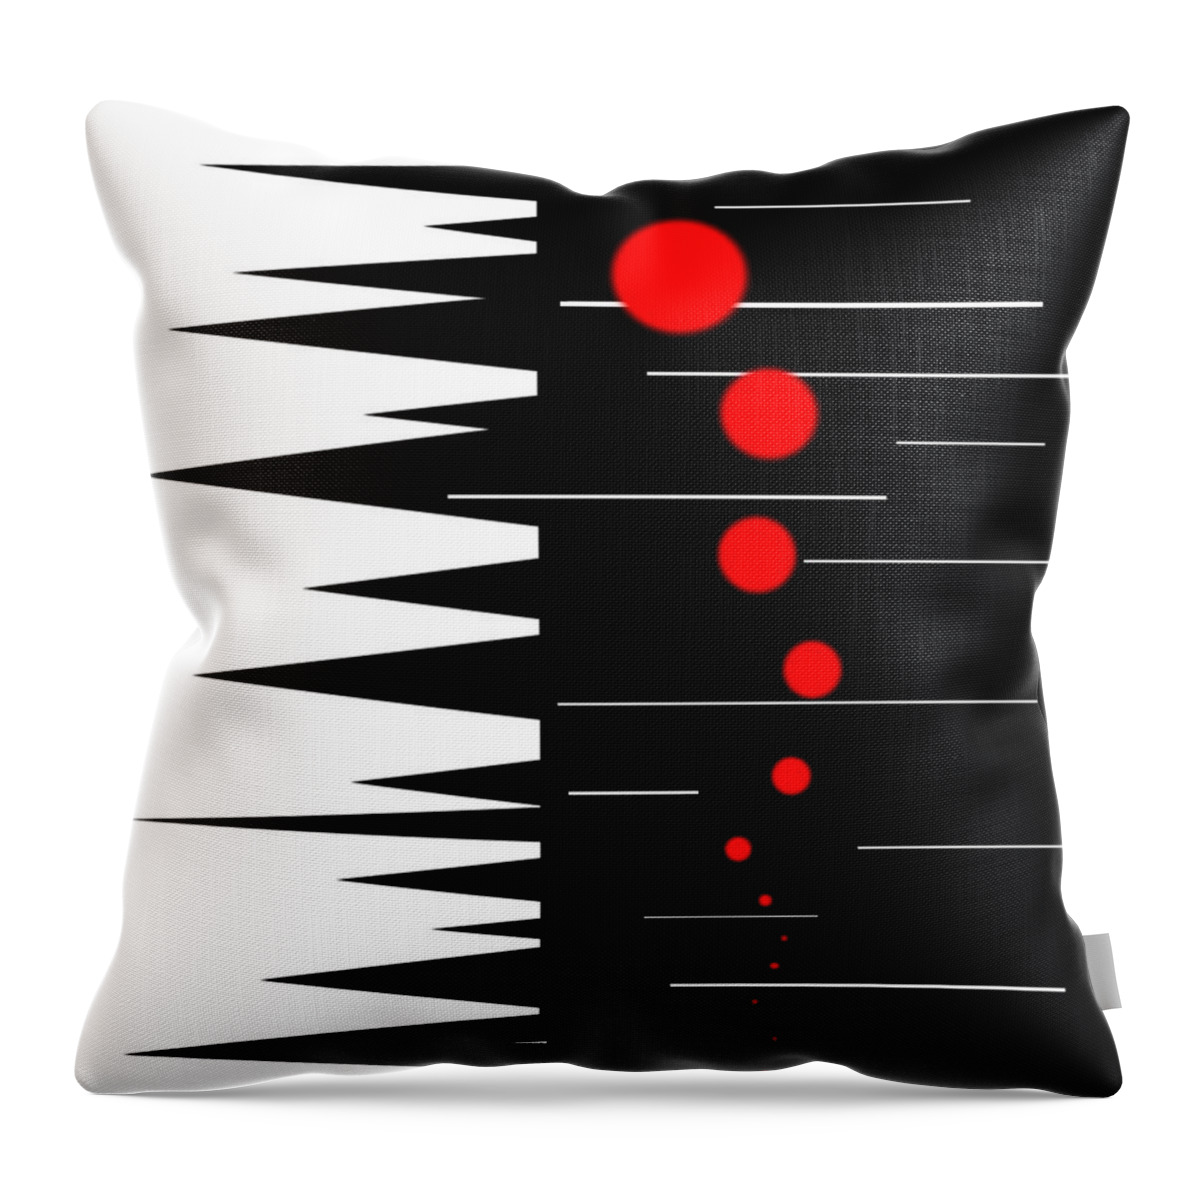 Black Throw Pillow featuring the digital art Free Falling by Designs By L